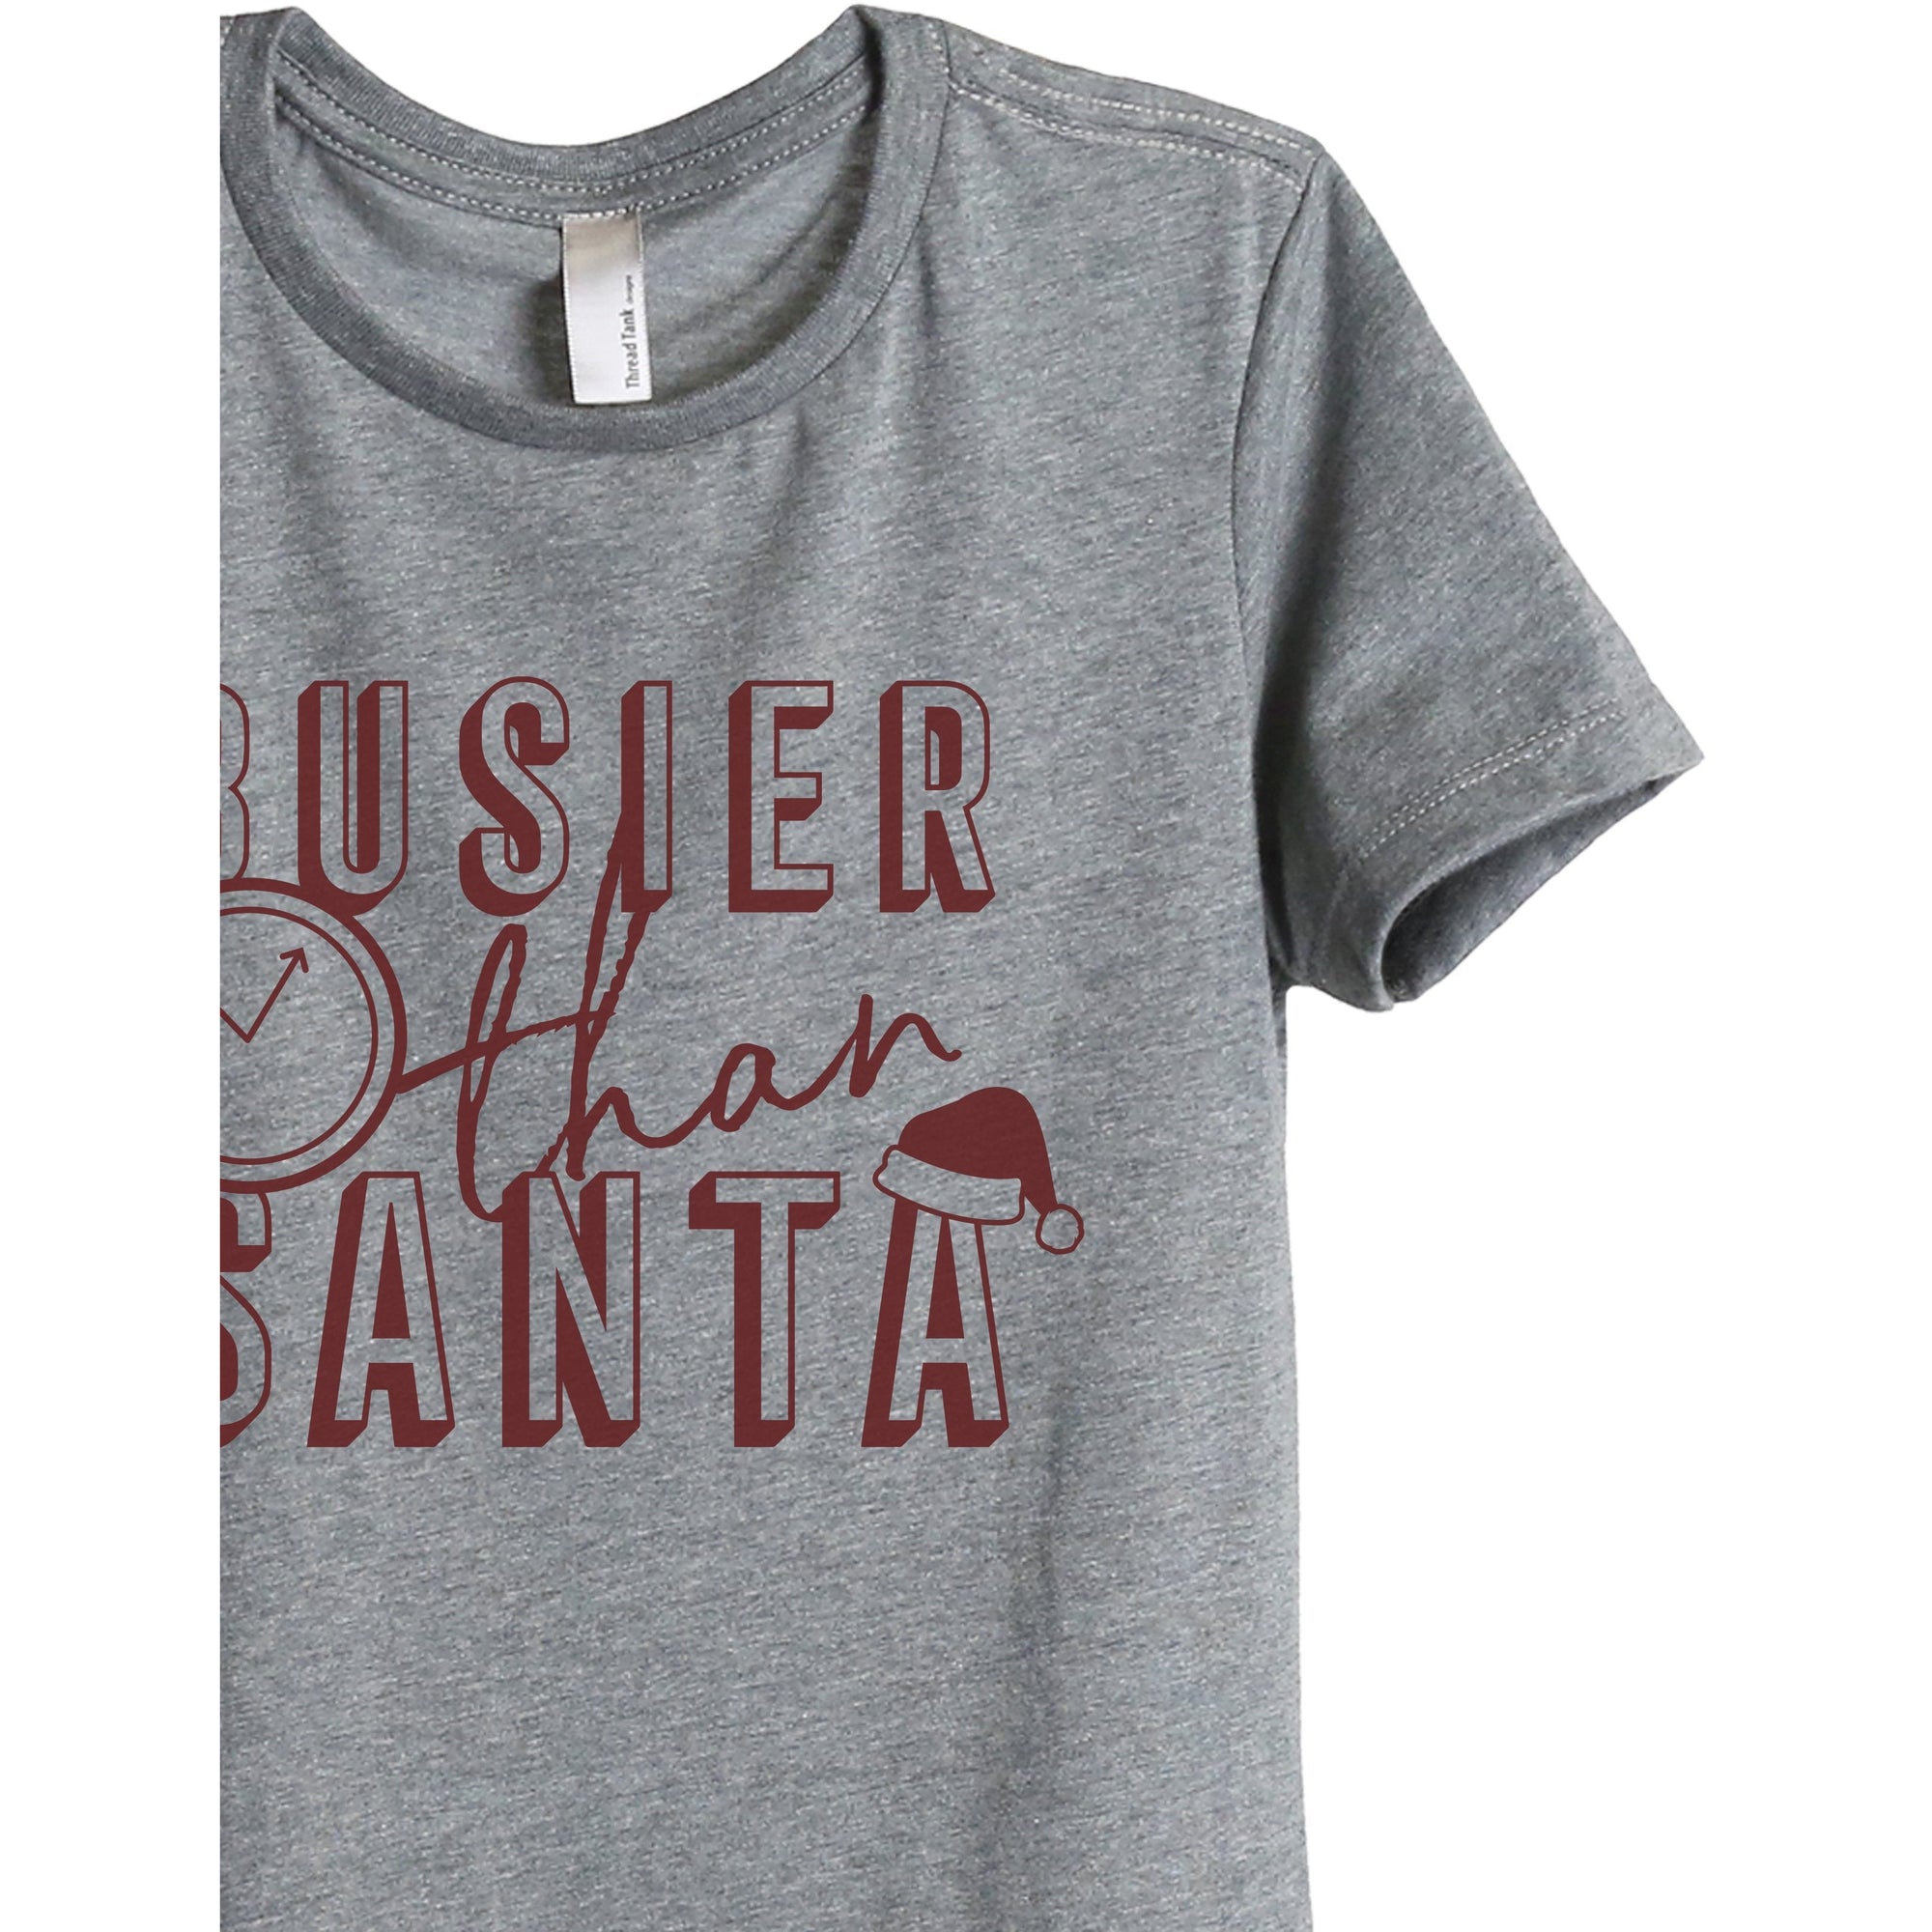 Busier Than Santa Women's Relaxed Crewneck T-Shirt Top Tee Heather Grey Scarlet Print Zoom Details